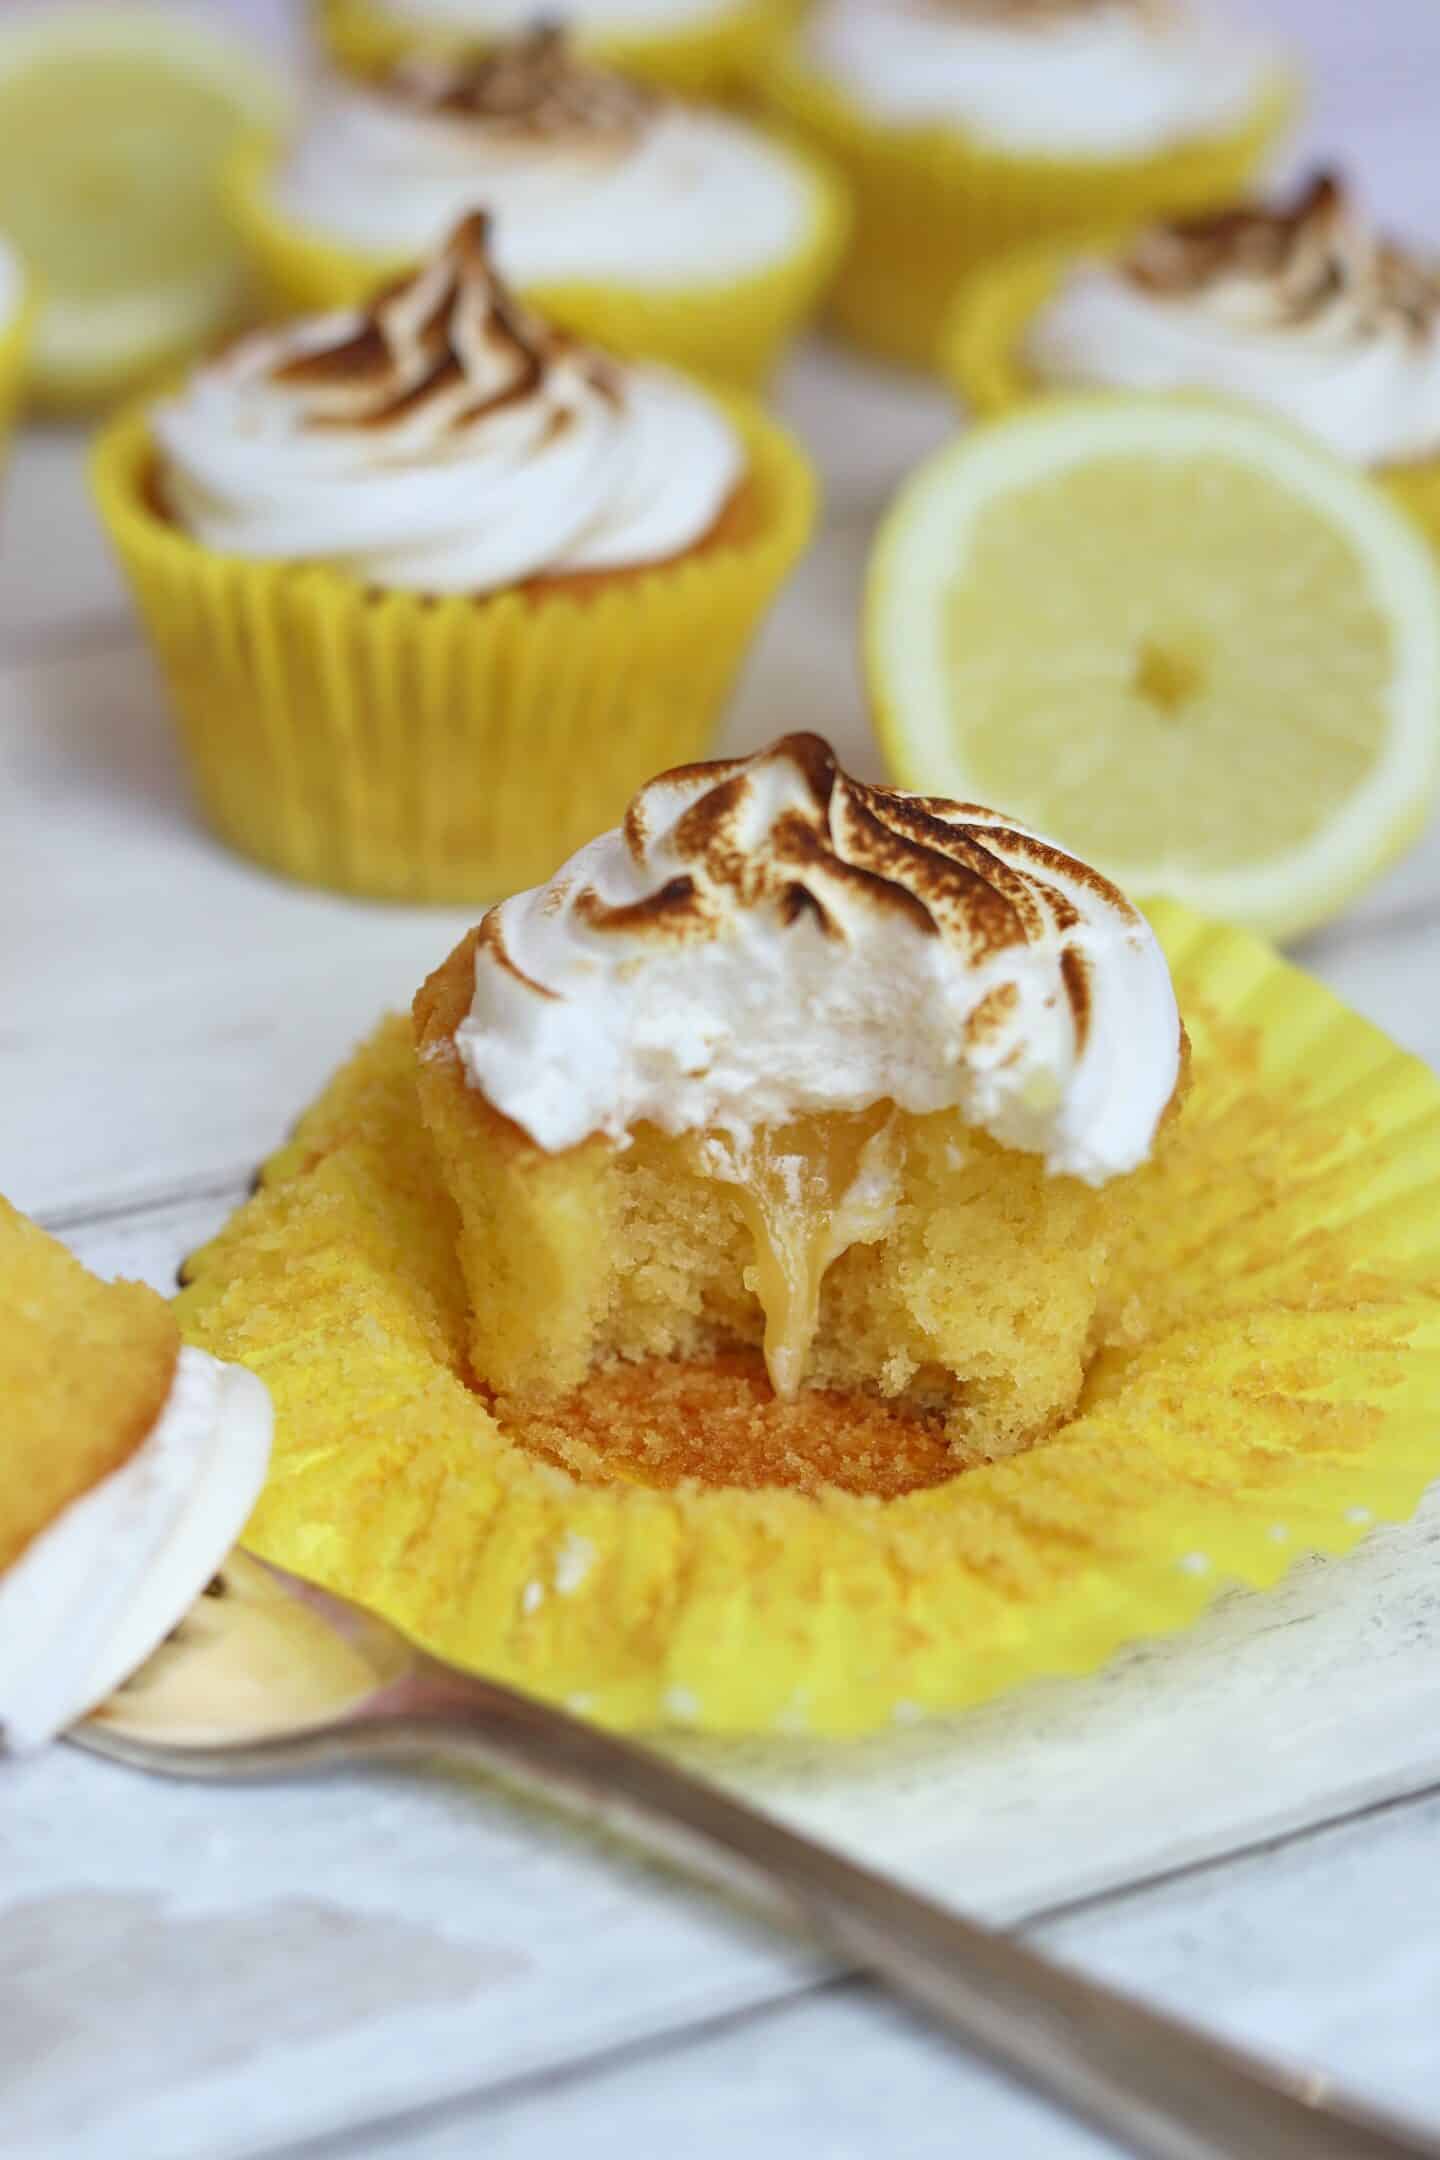 A lemon cupcake with lemon curd centre, with meringue on top.